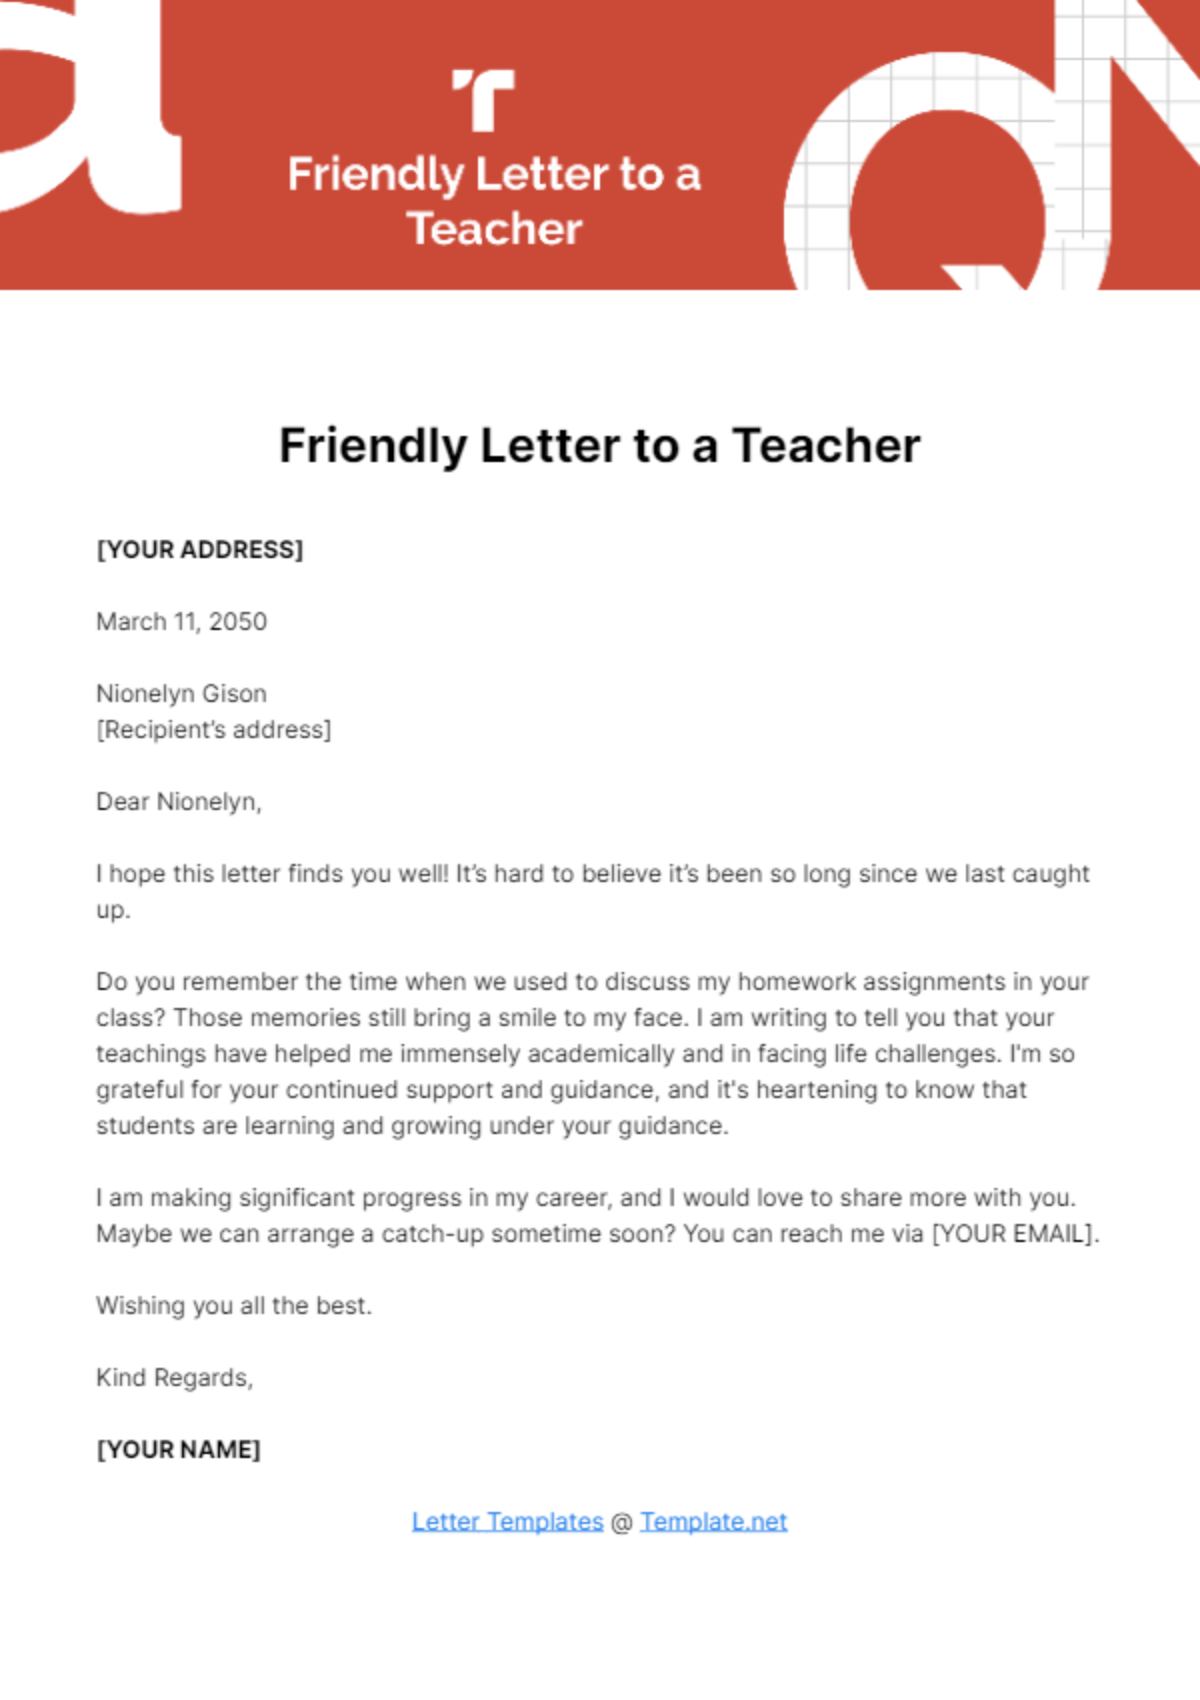 Free Friendly Letter to a Teacher Template